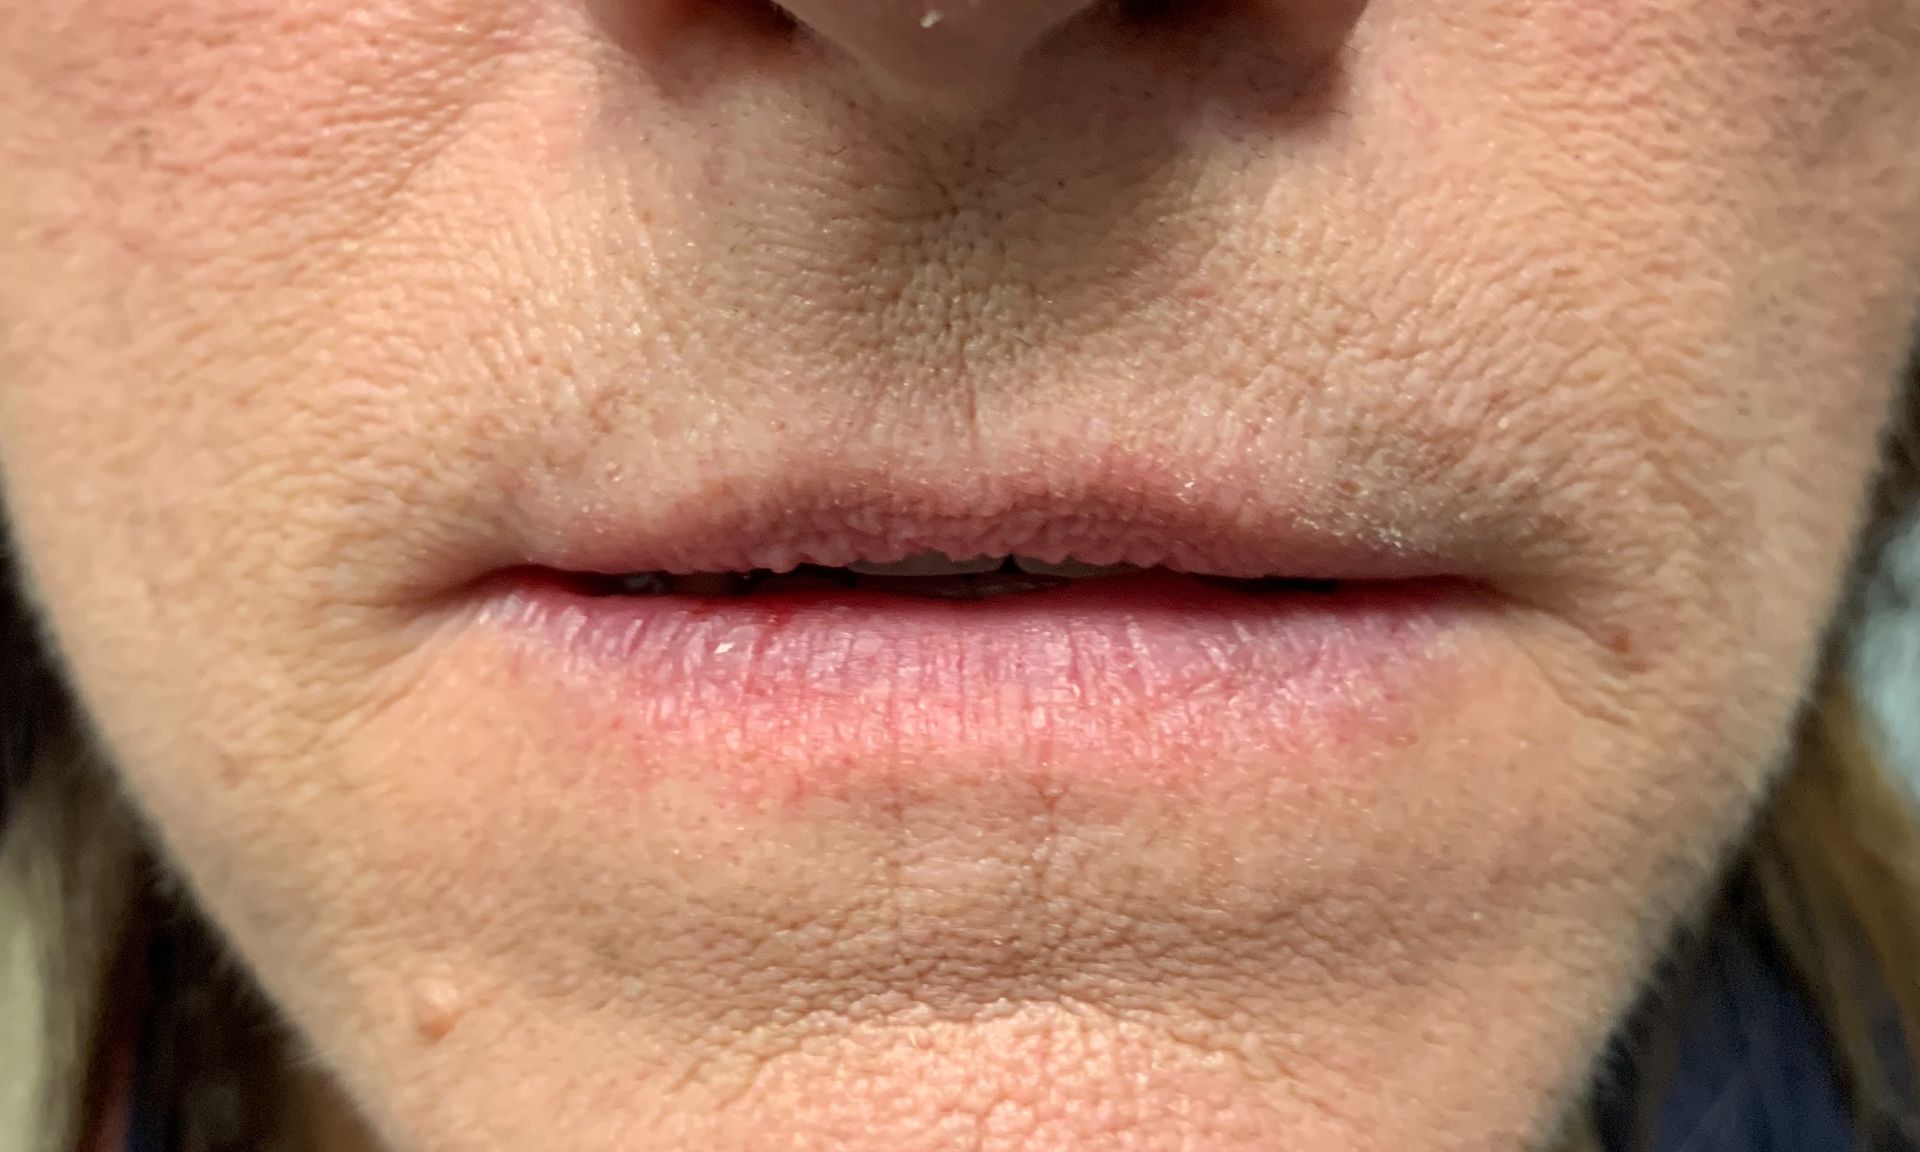 A close up of a woman 's mouth with wrinkles.